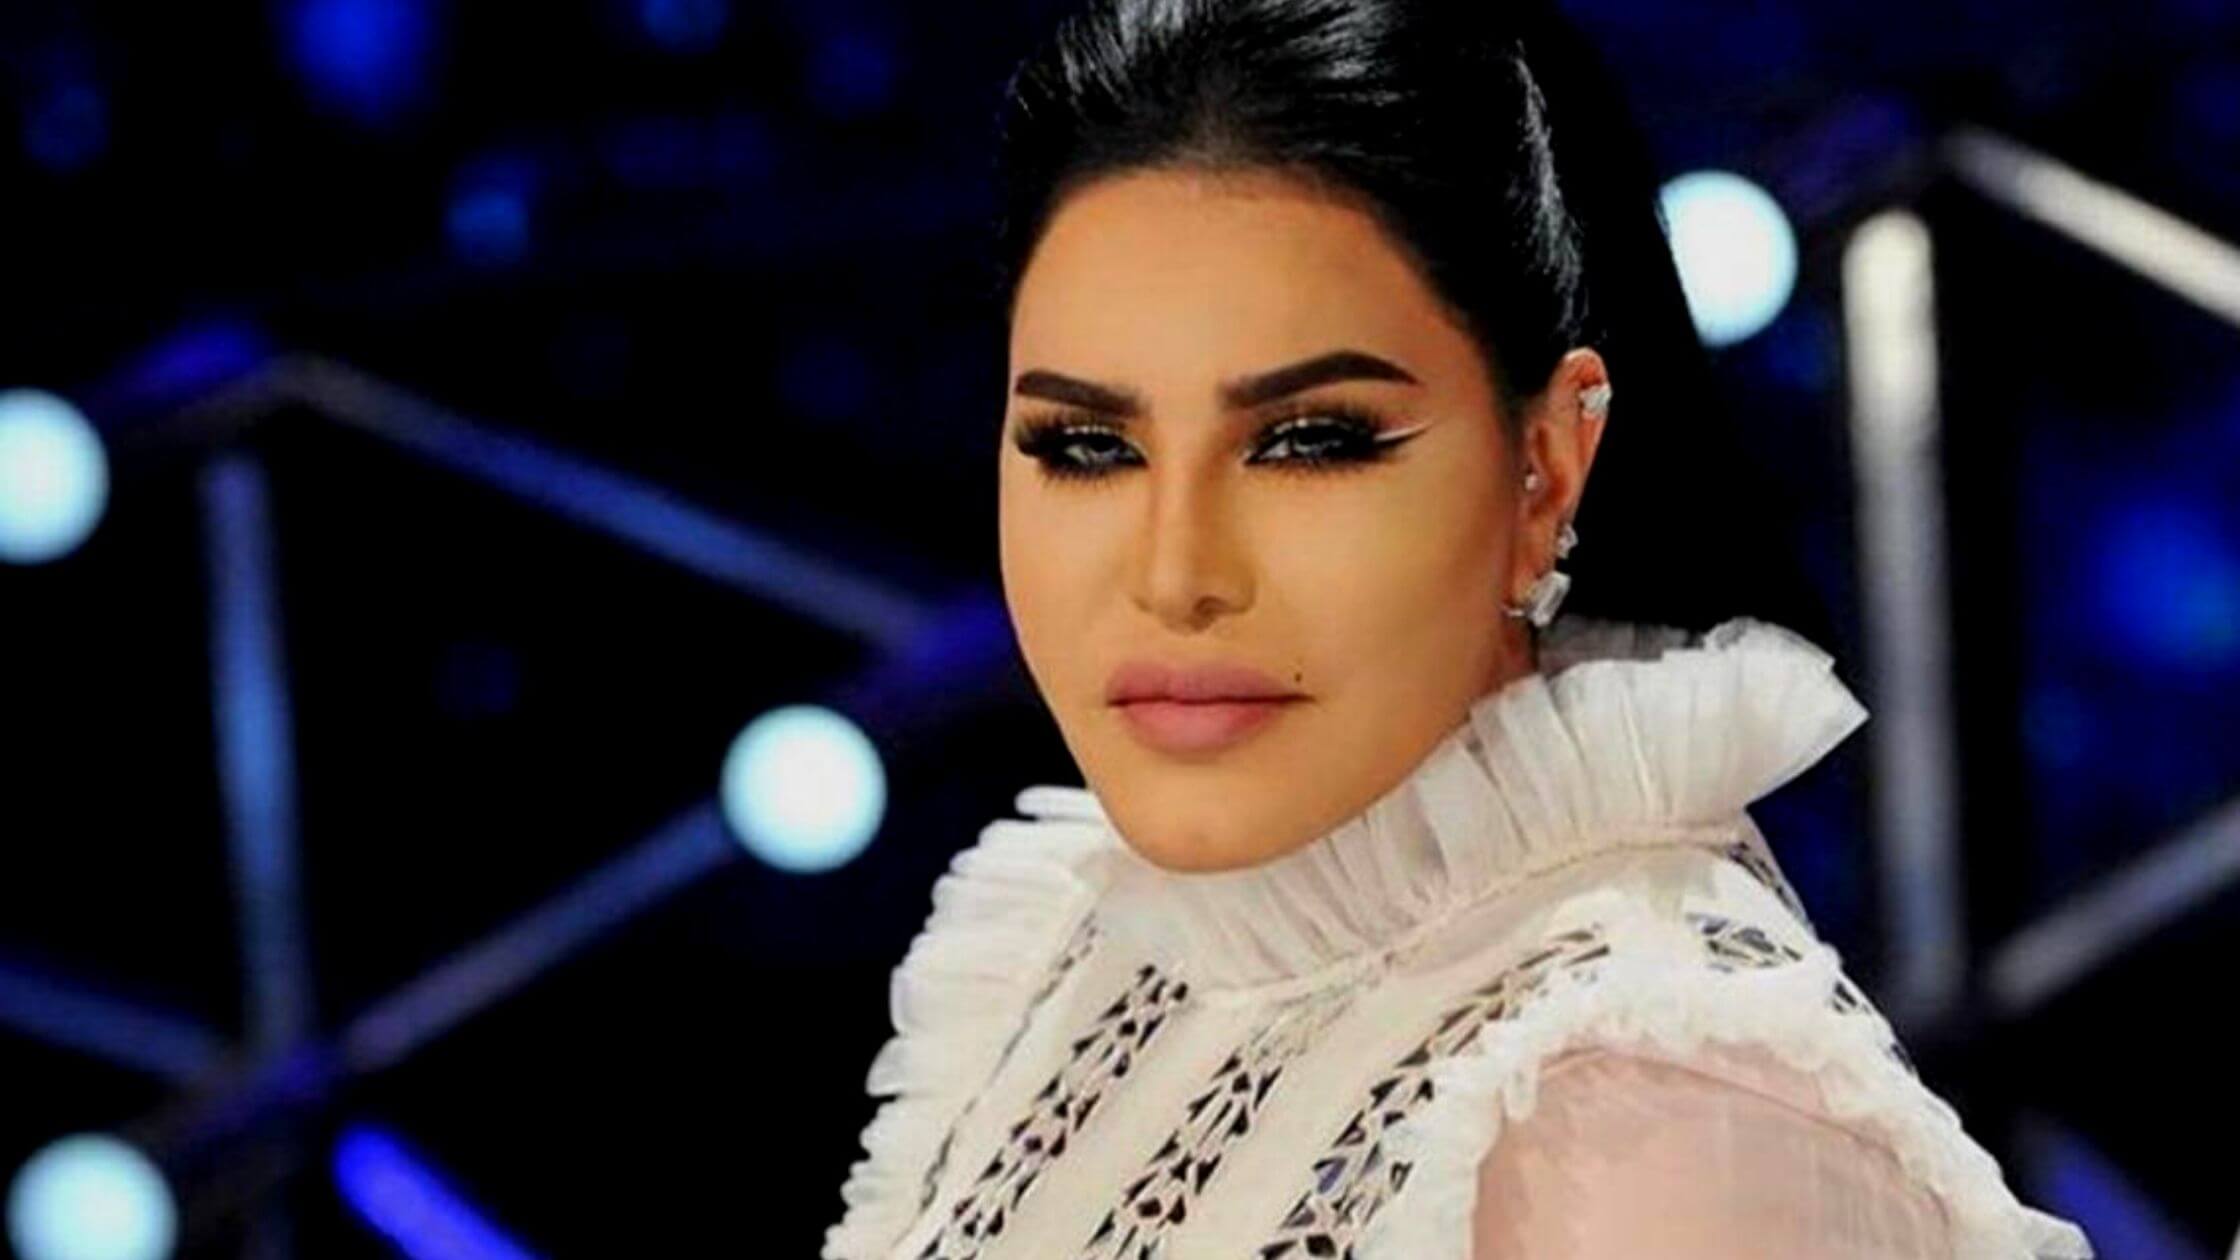 Ahlam Al Shamsi Insta, Age, Net Worth, Height, And More With Our Comprehensive Profile